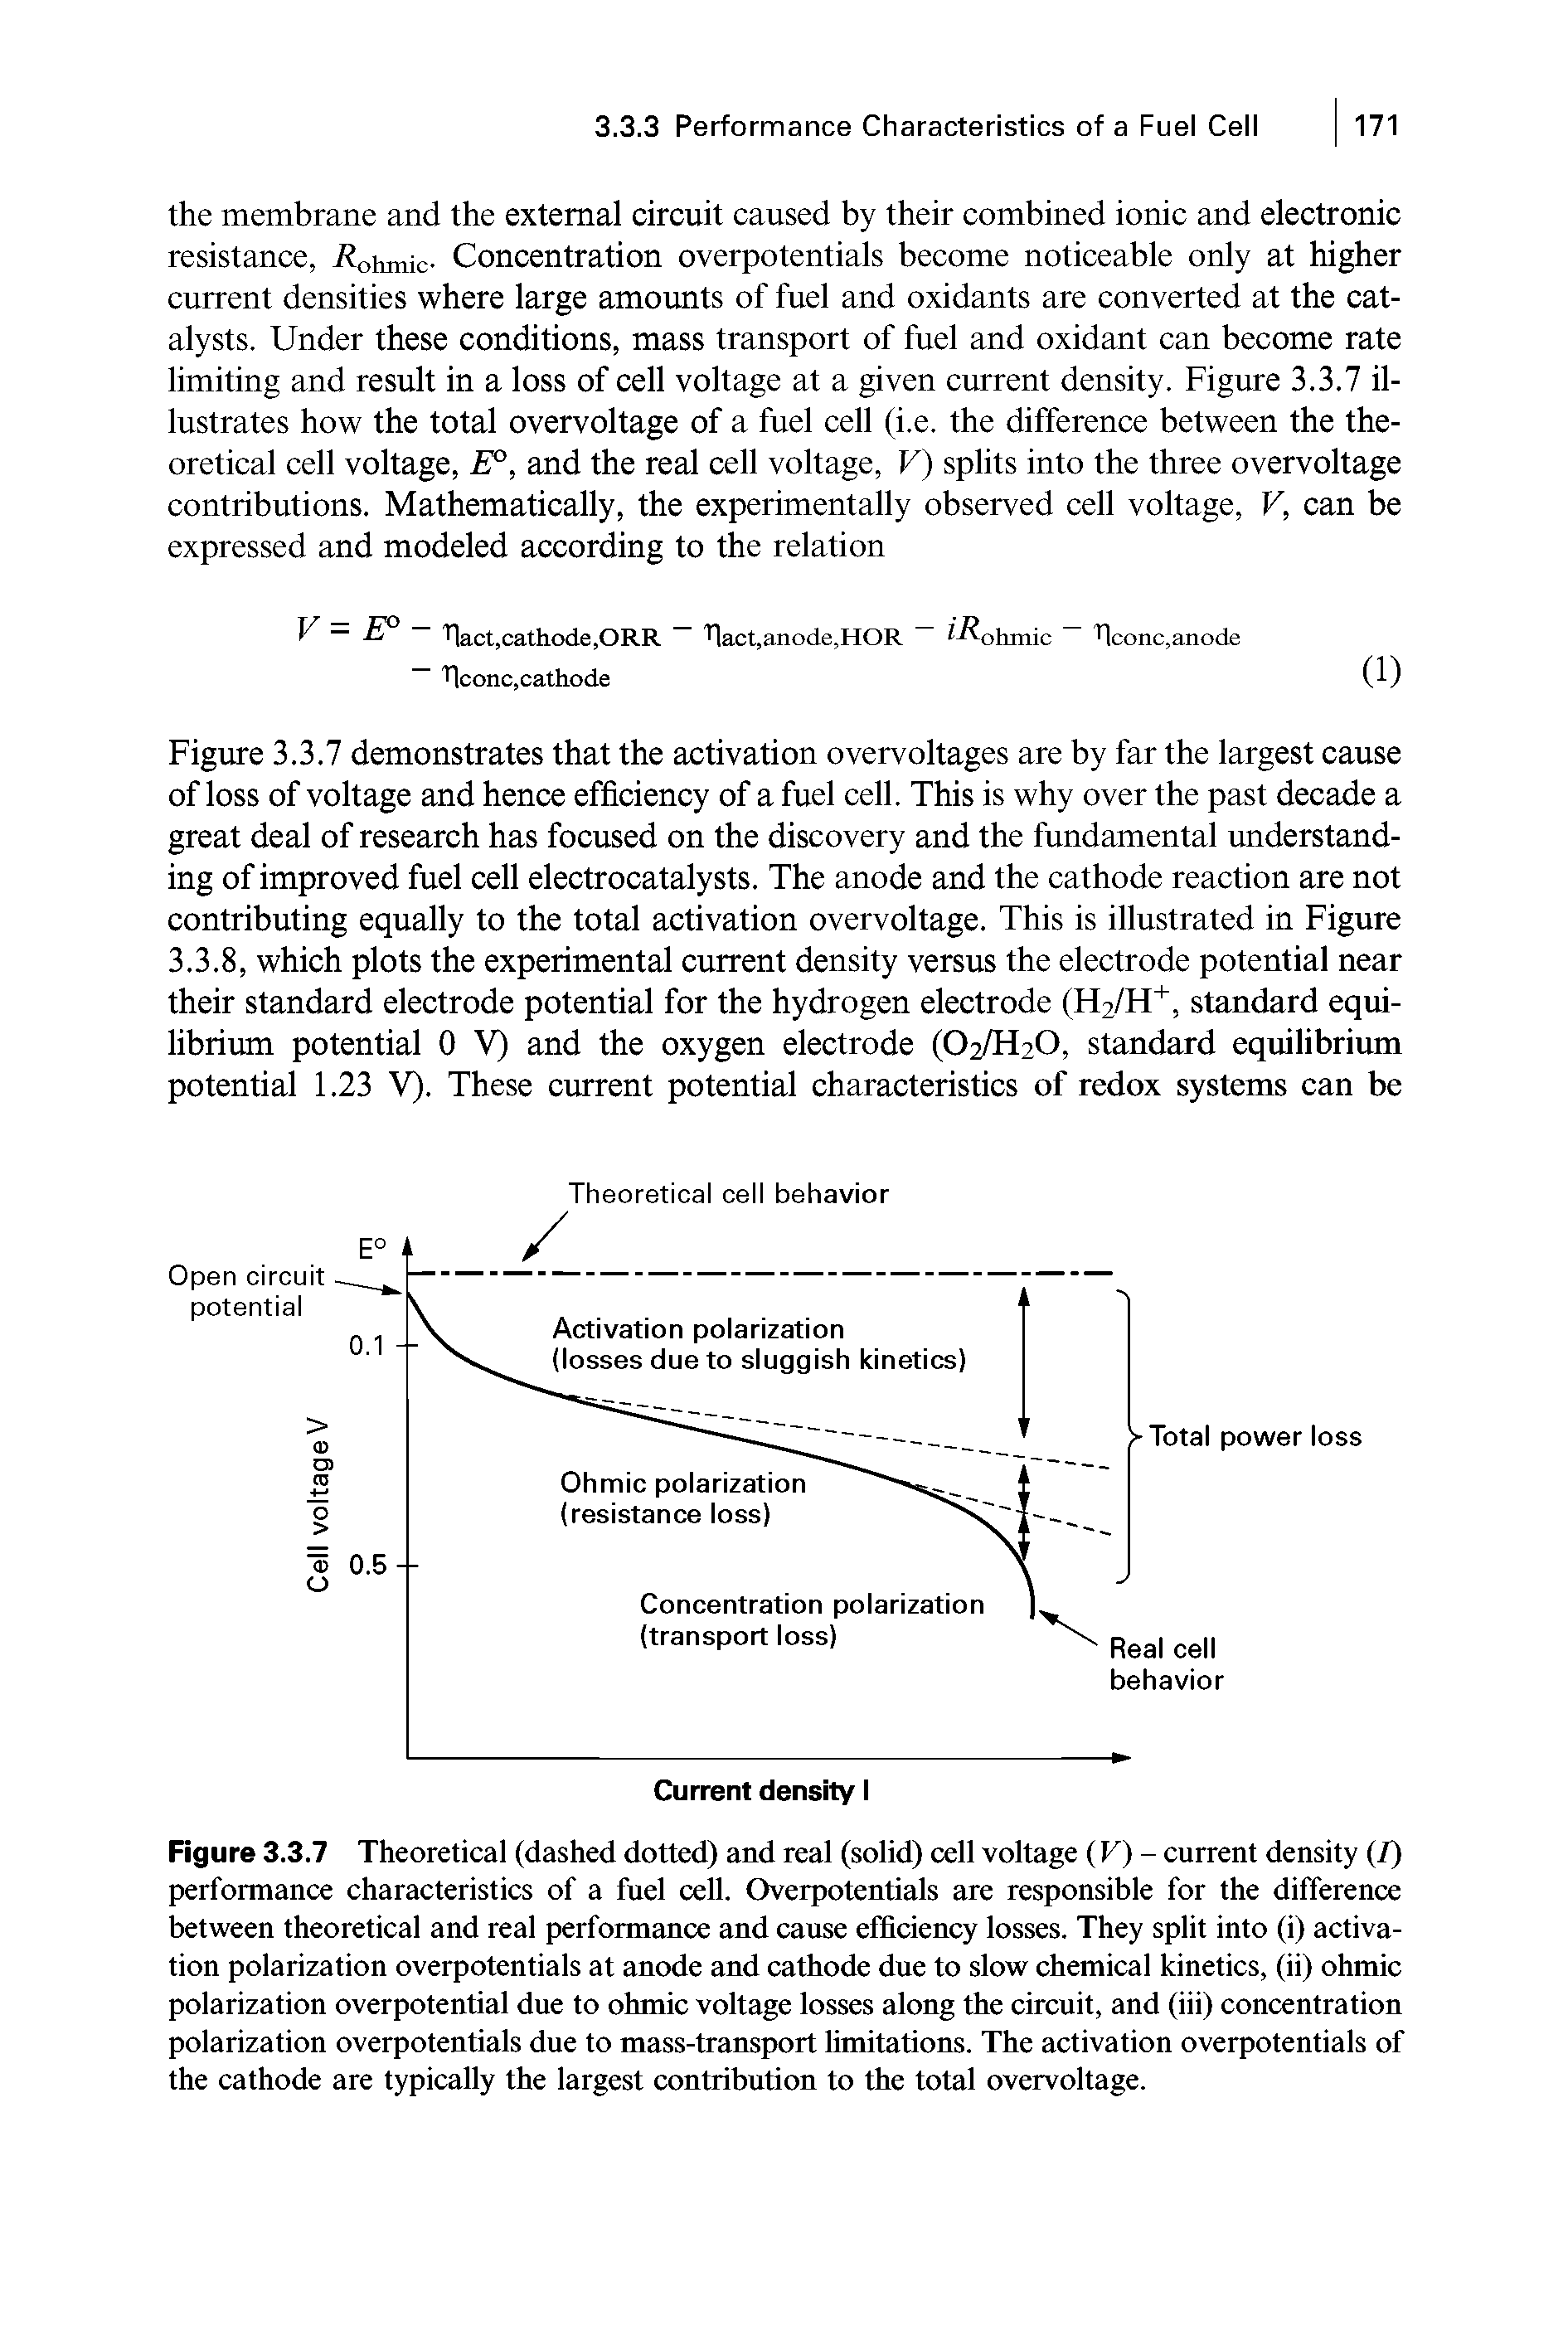 Figure 3.3.7 Theoretical (dashed dotted) and real (solid) cell voltage (V) - current density (I) performance characteristics of a fuel cell. Overpotentials are responsible for the difference between theoretical and real performance and cause efficiency losses. They split into (i) activation polarization overpotentials at anode and cathode due to slow chemical kinetics, (ii) ohmic polarization overpotential due to ohmic voltage losses along the circuit, and (iii) concentration polarization overpotentials due to mass-transport limitations. The activation overpotentials of the cathode are typically the largest contribution to the total overvoltage.